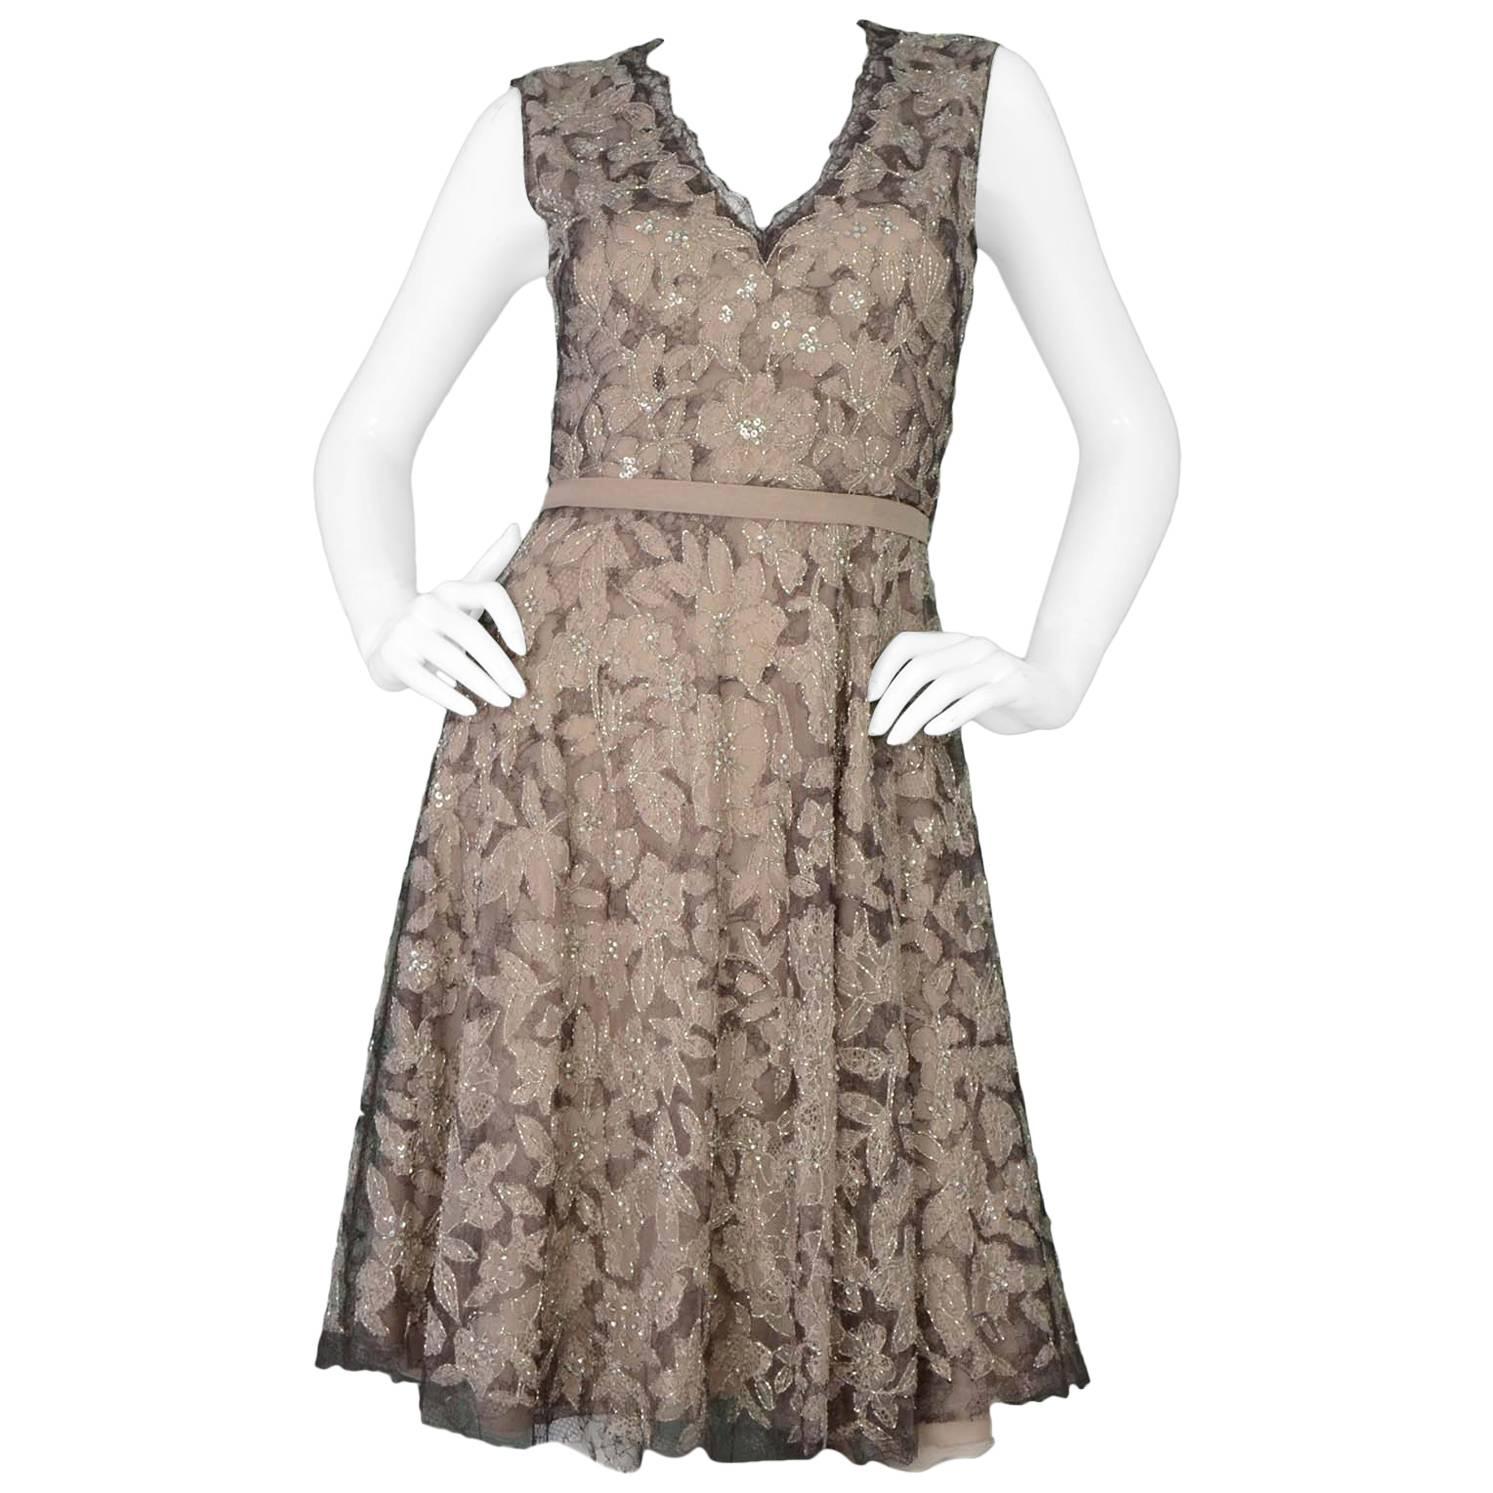 Valentino Beige Floral Lace and Beaded Sleeveless Dress sz Small